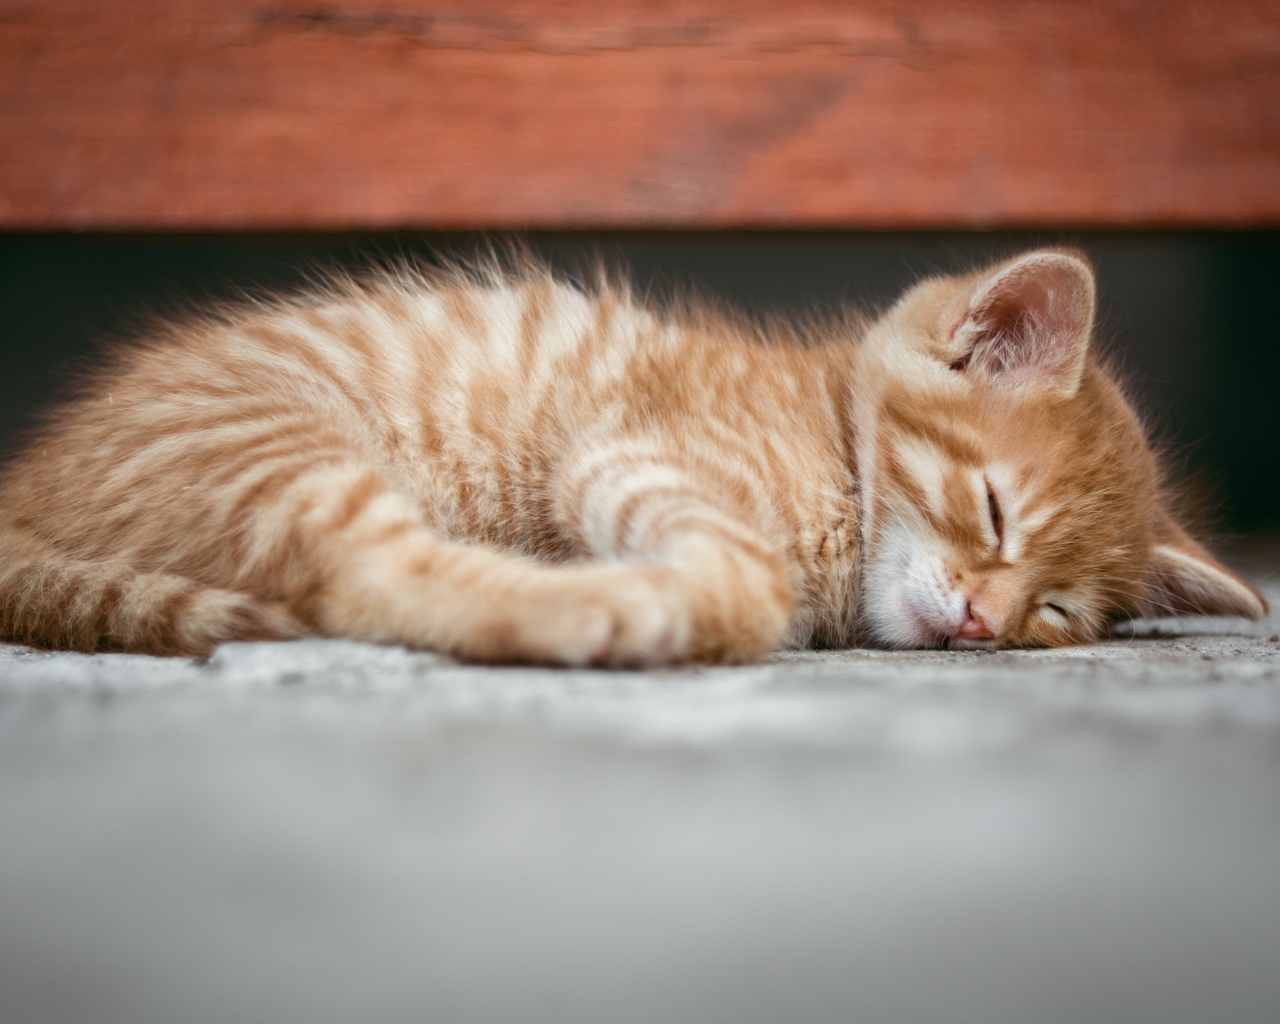 A little red kitten is sleeping on the ground